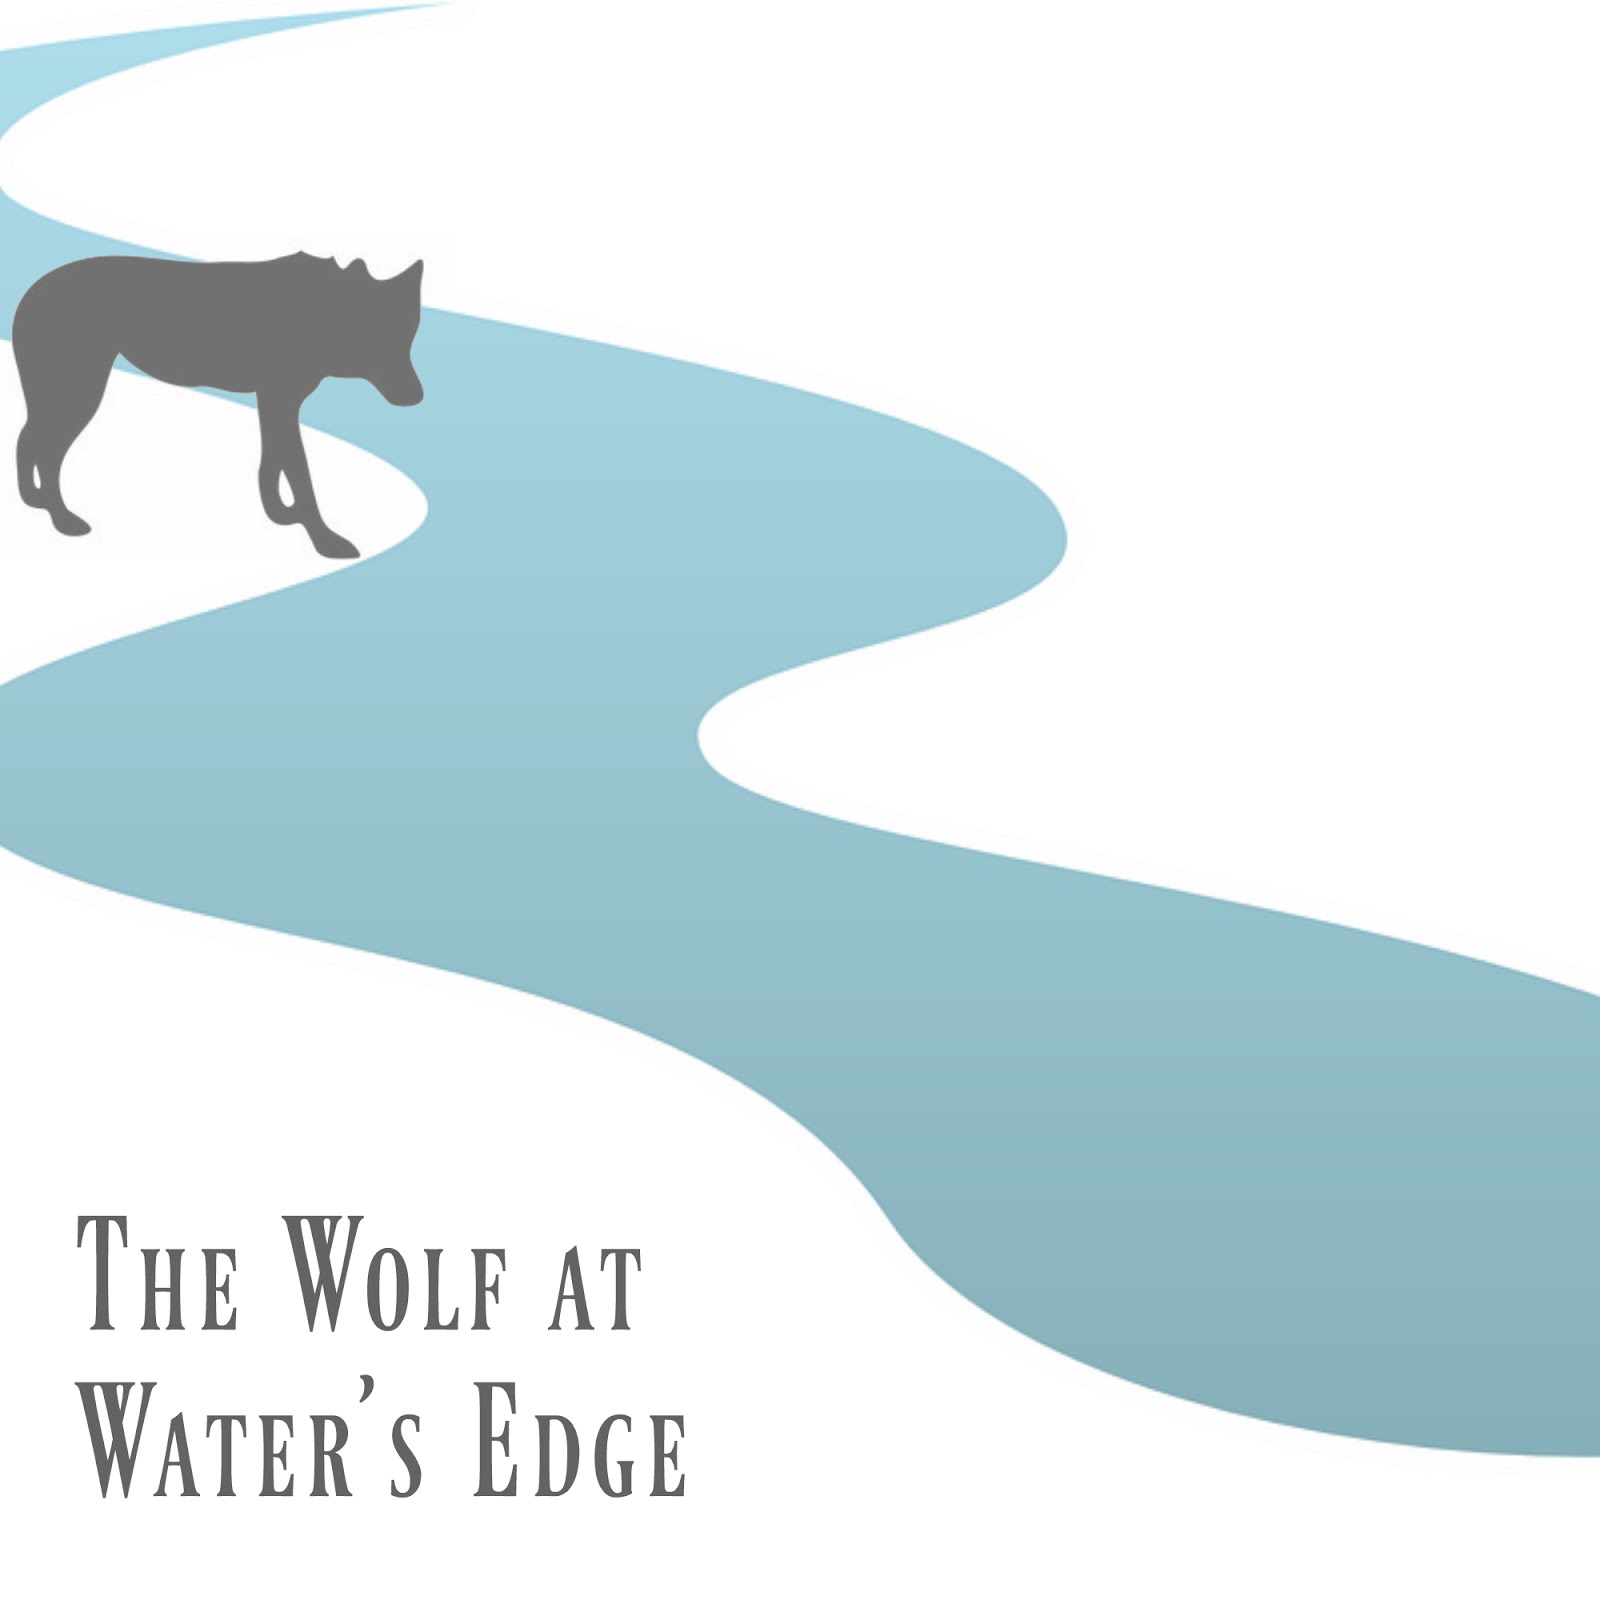 The Wolf at Water's Edge